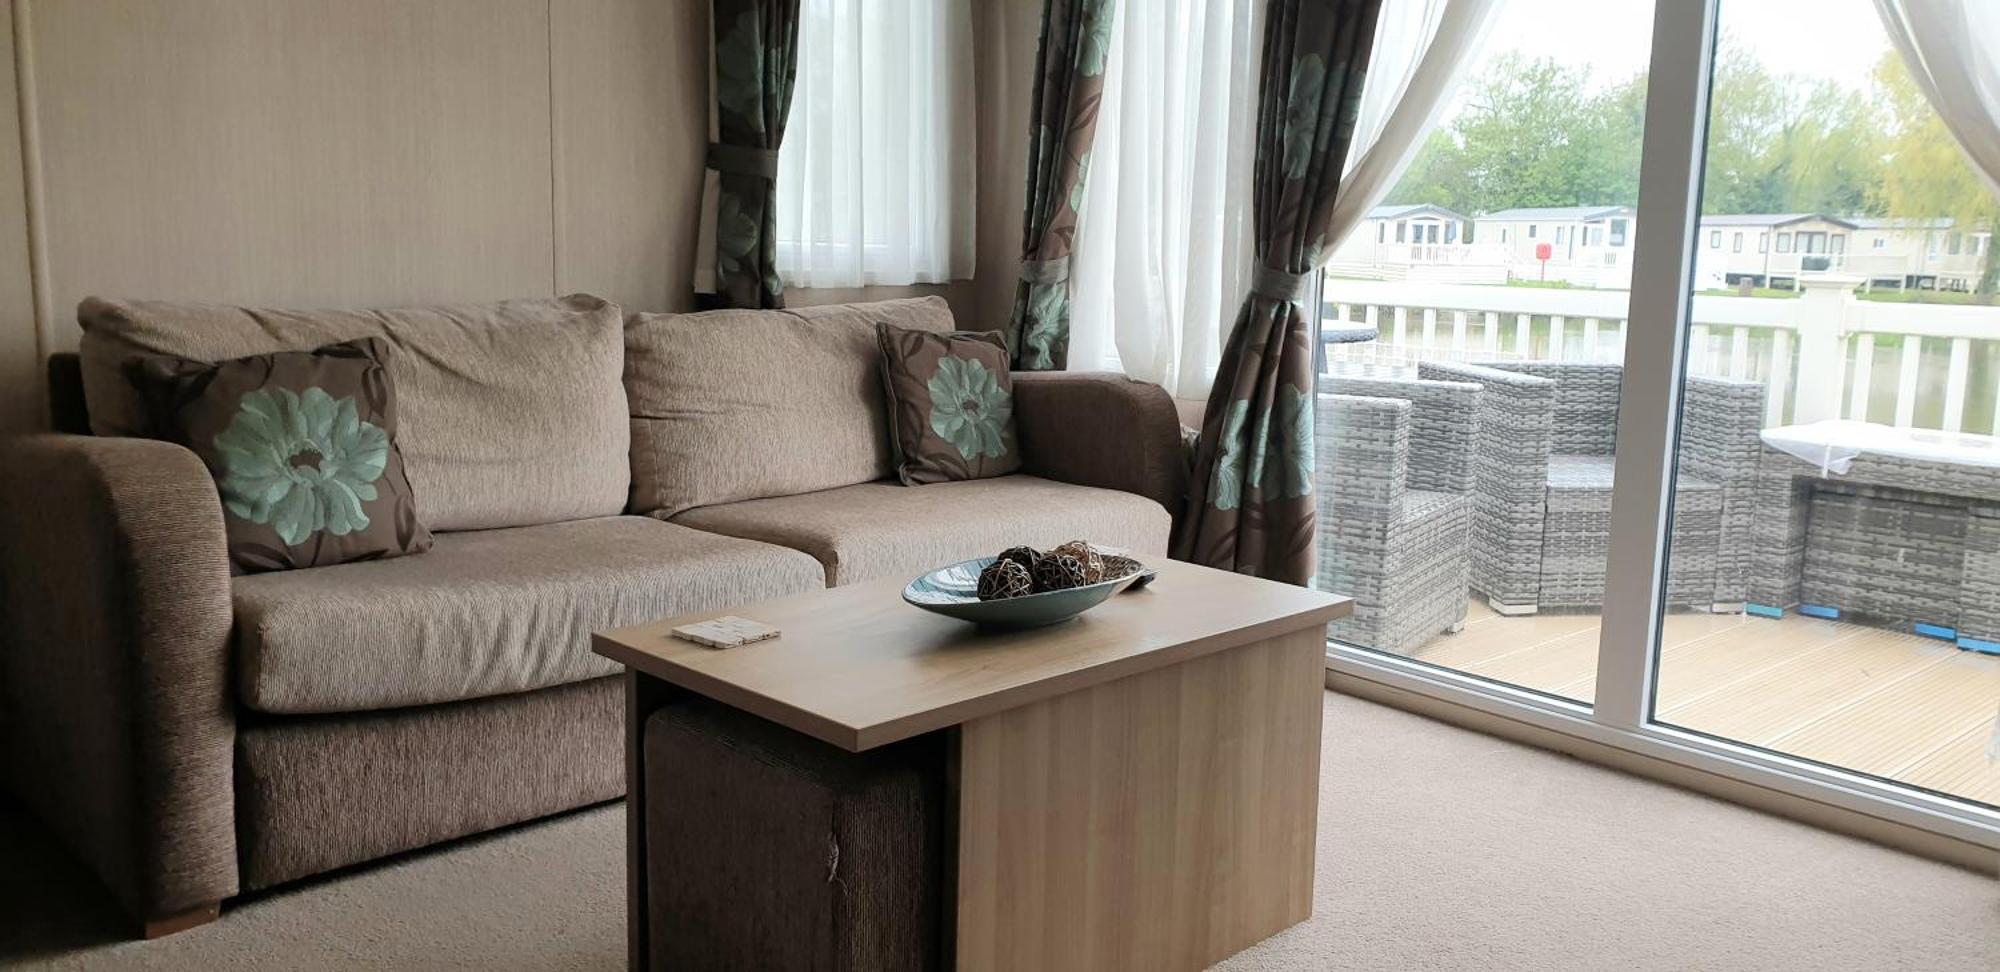 Lakeside Cotswold Holiday Home Cirencester Room photo